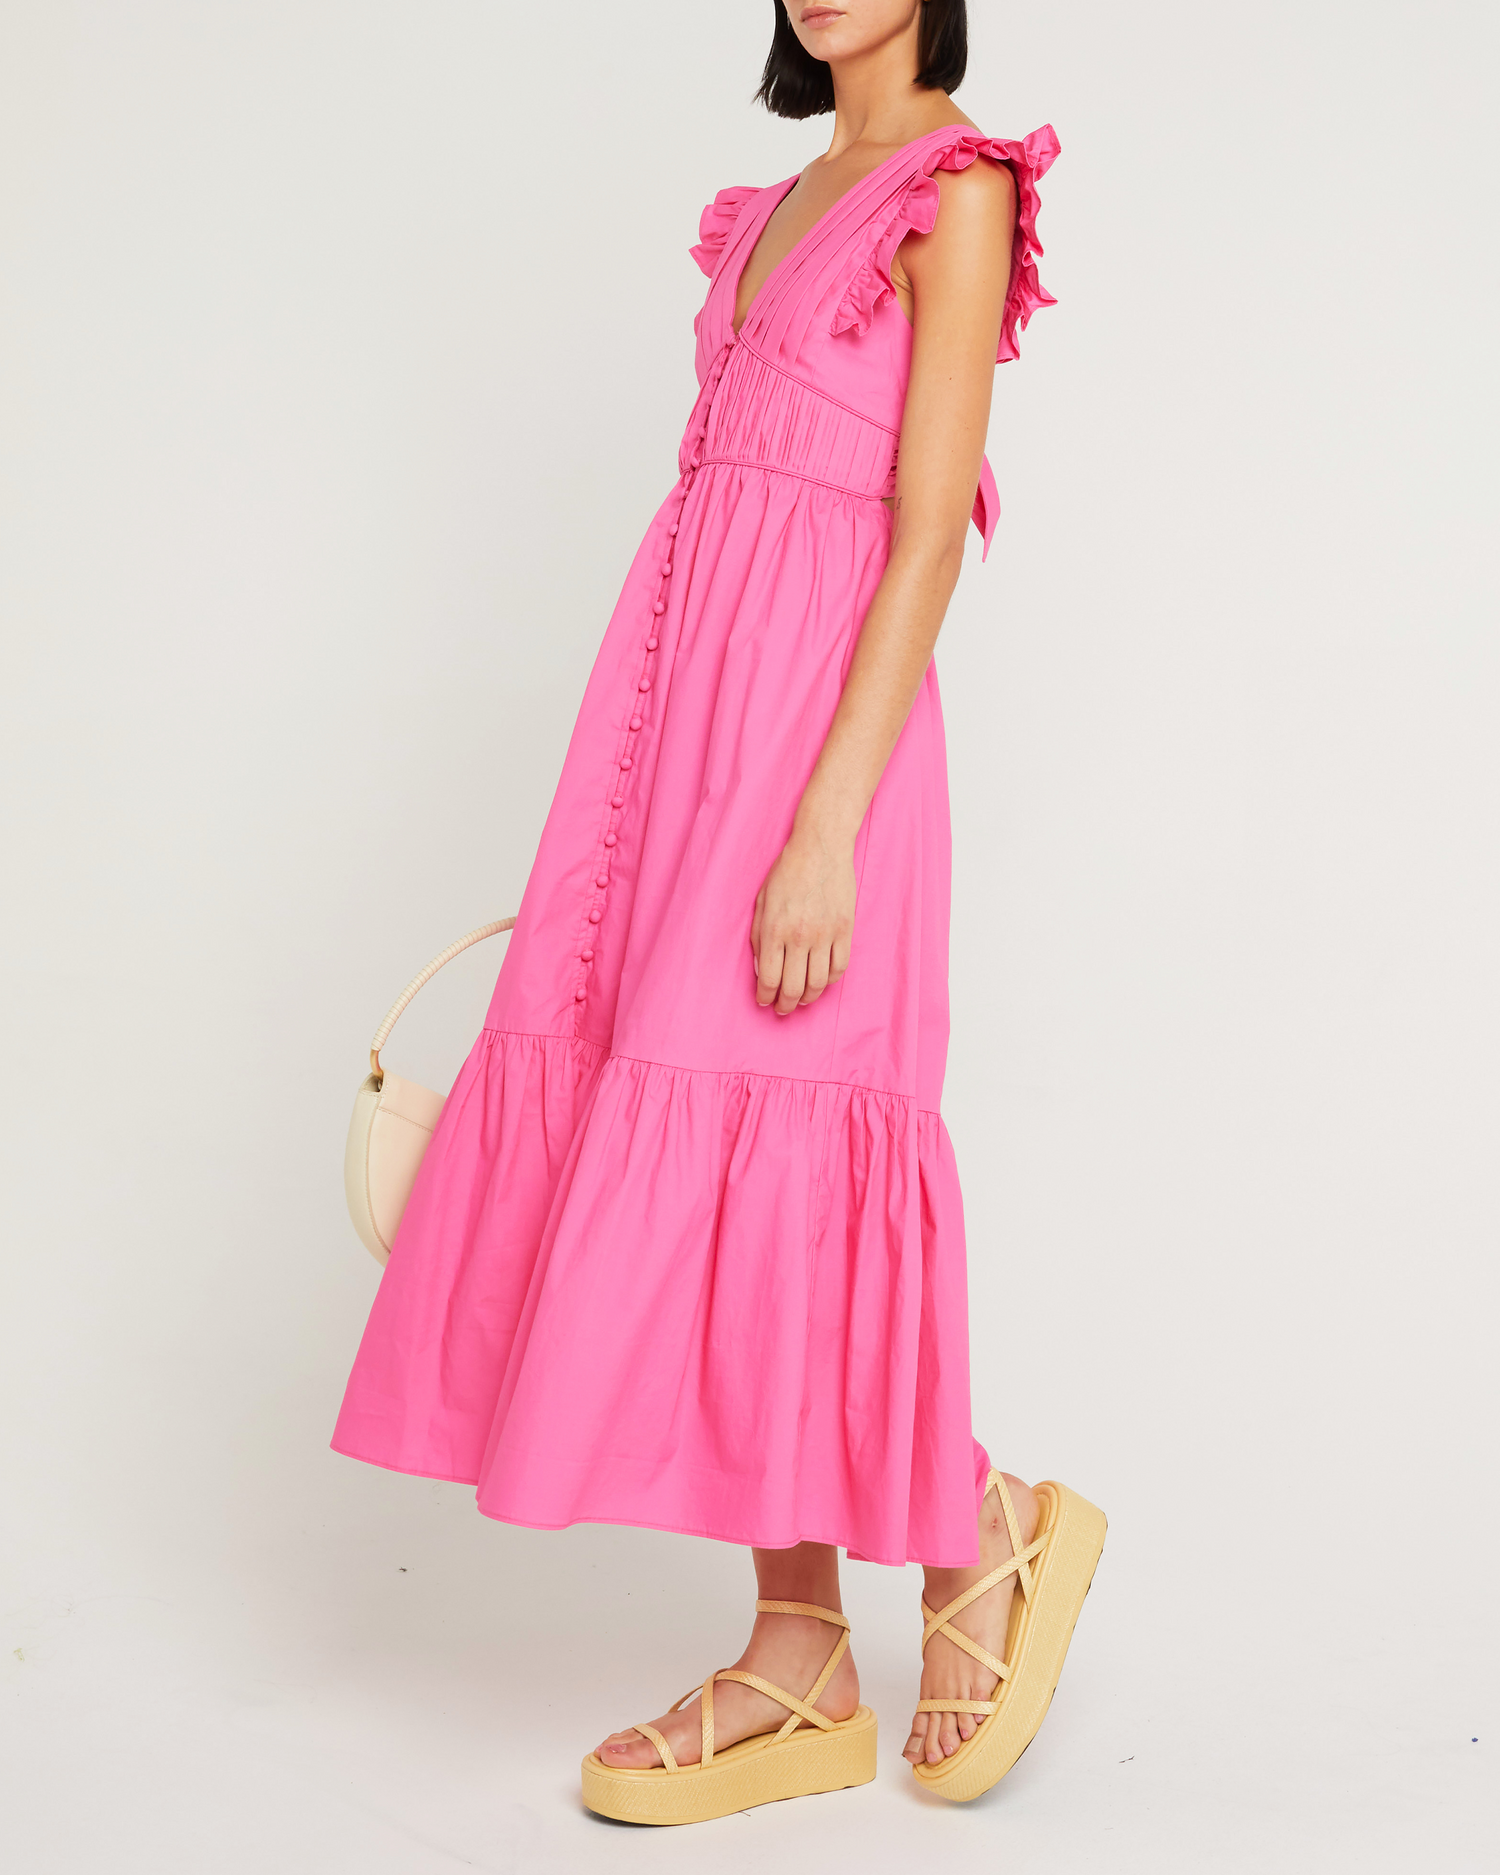 Third image of Stella Dress, a pink midi dress, open back, front buttons, ribbon tie, bow, ruffle sleeves